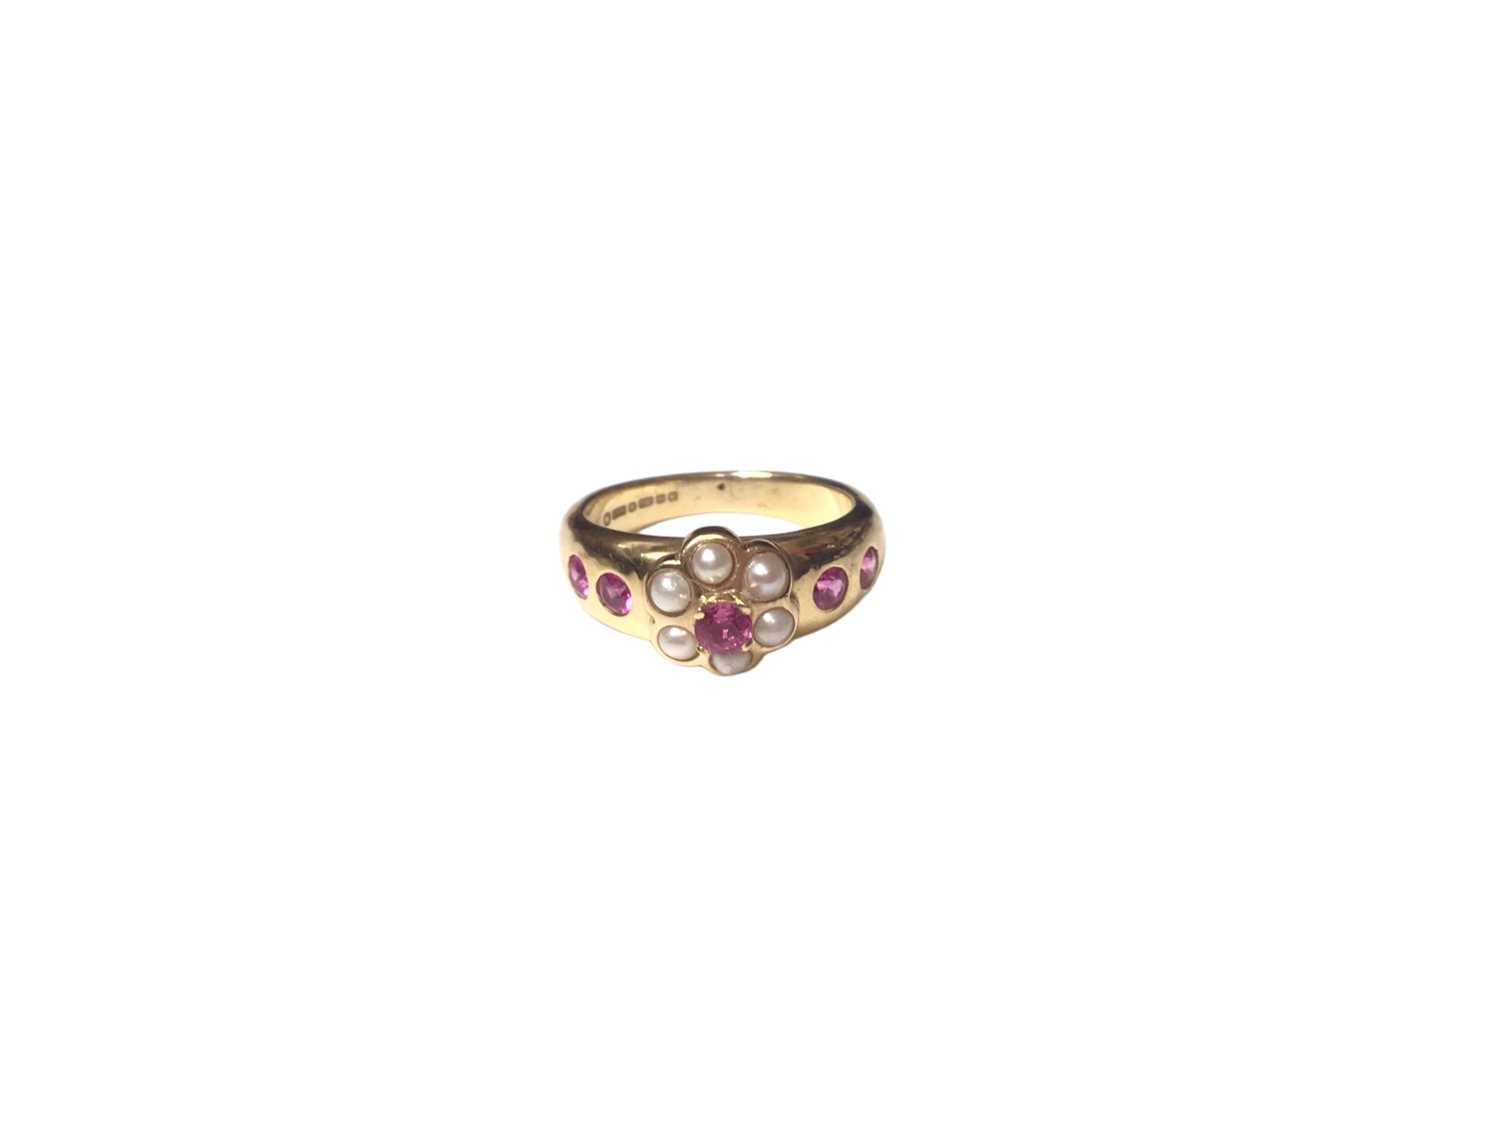 Antique style 18ct gold pink stone and seed pearl flower head ring - Image 2 of 4